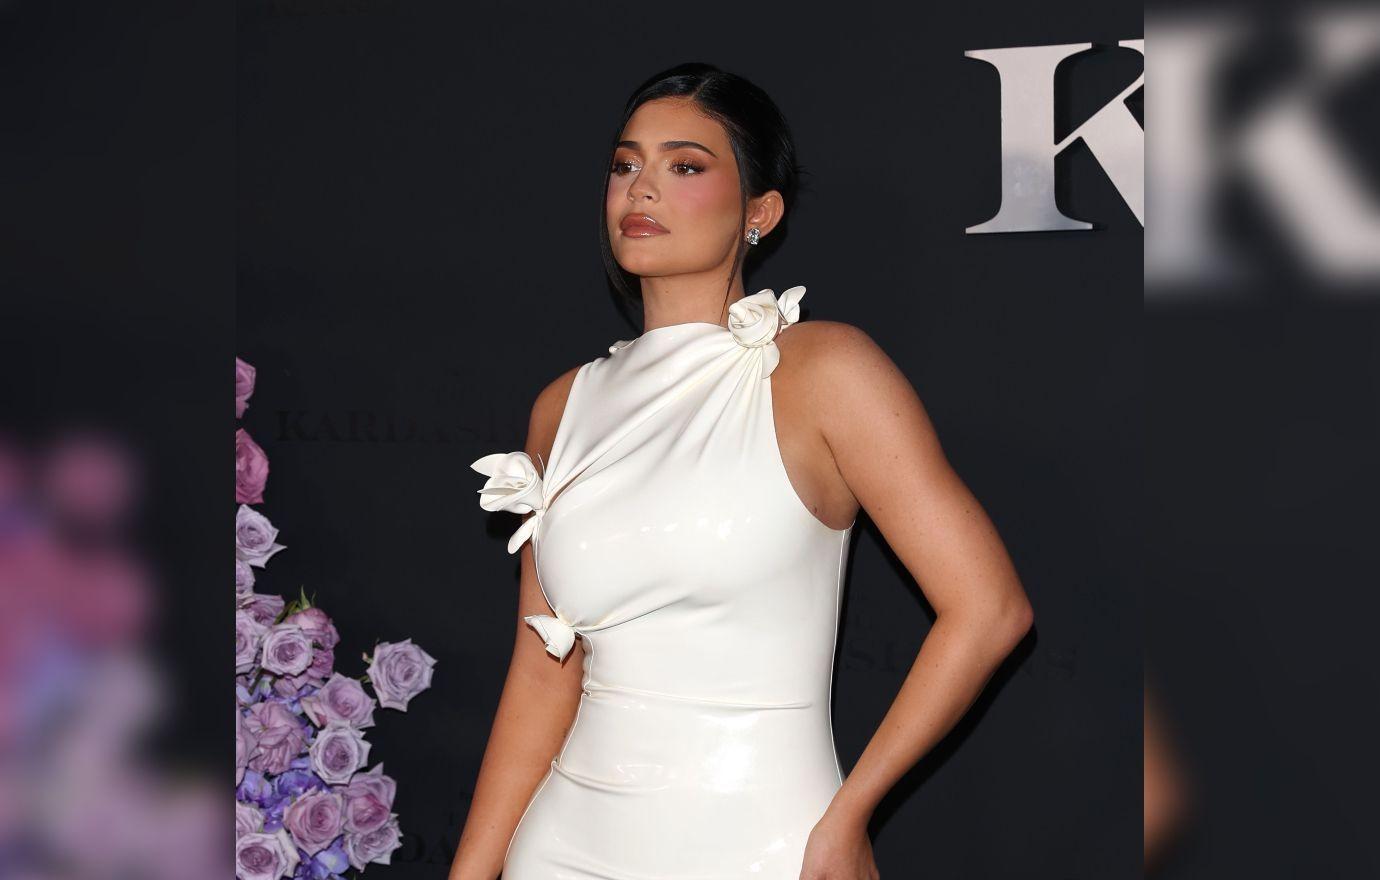 Kylie Jenner accused of copying influencer Lorna Luxe's bespoke 10